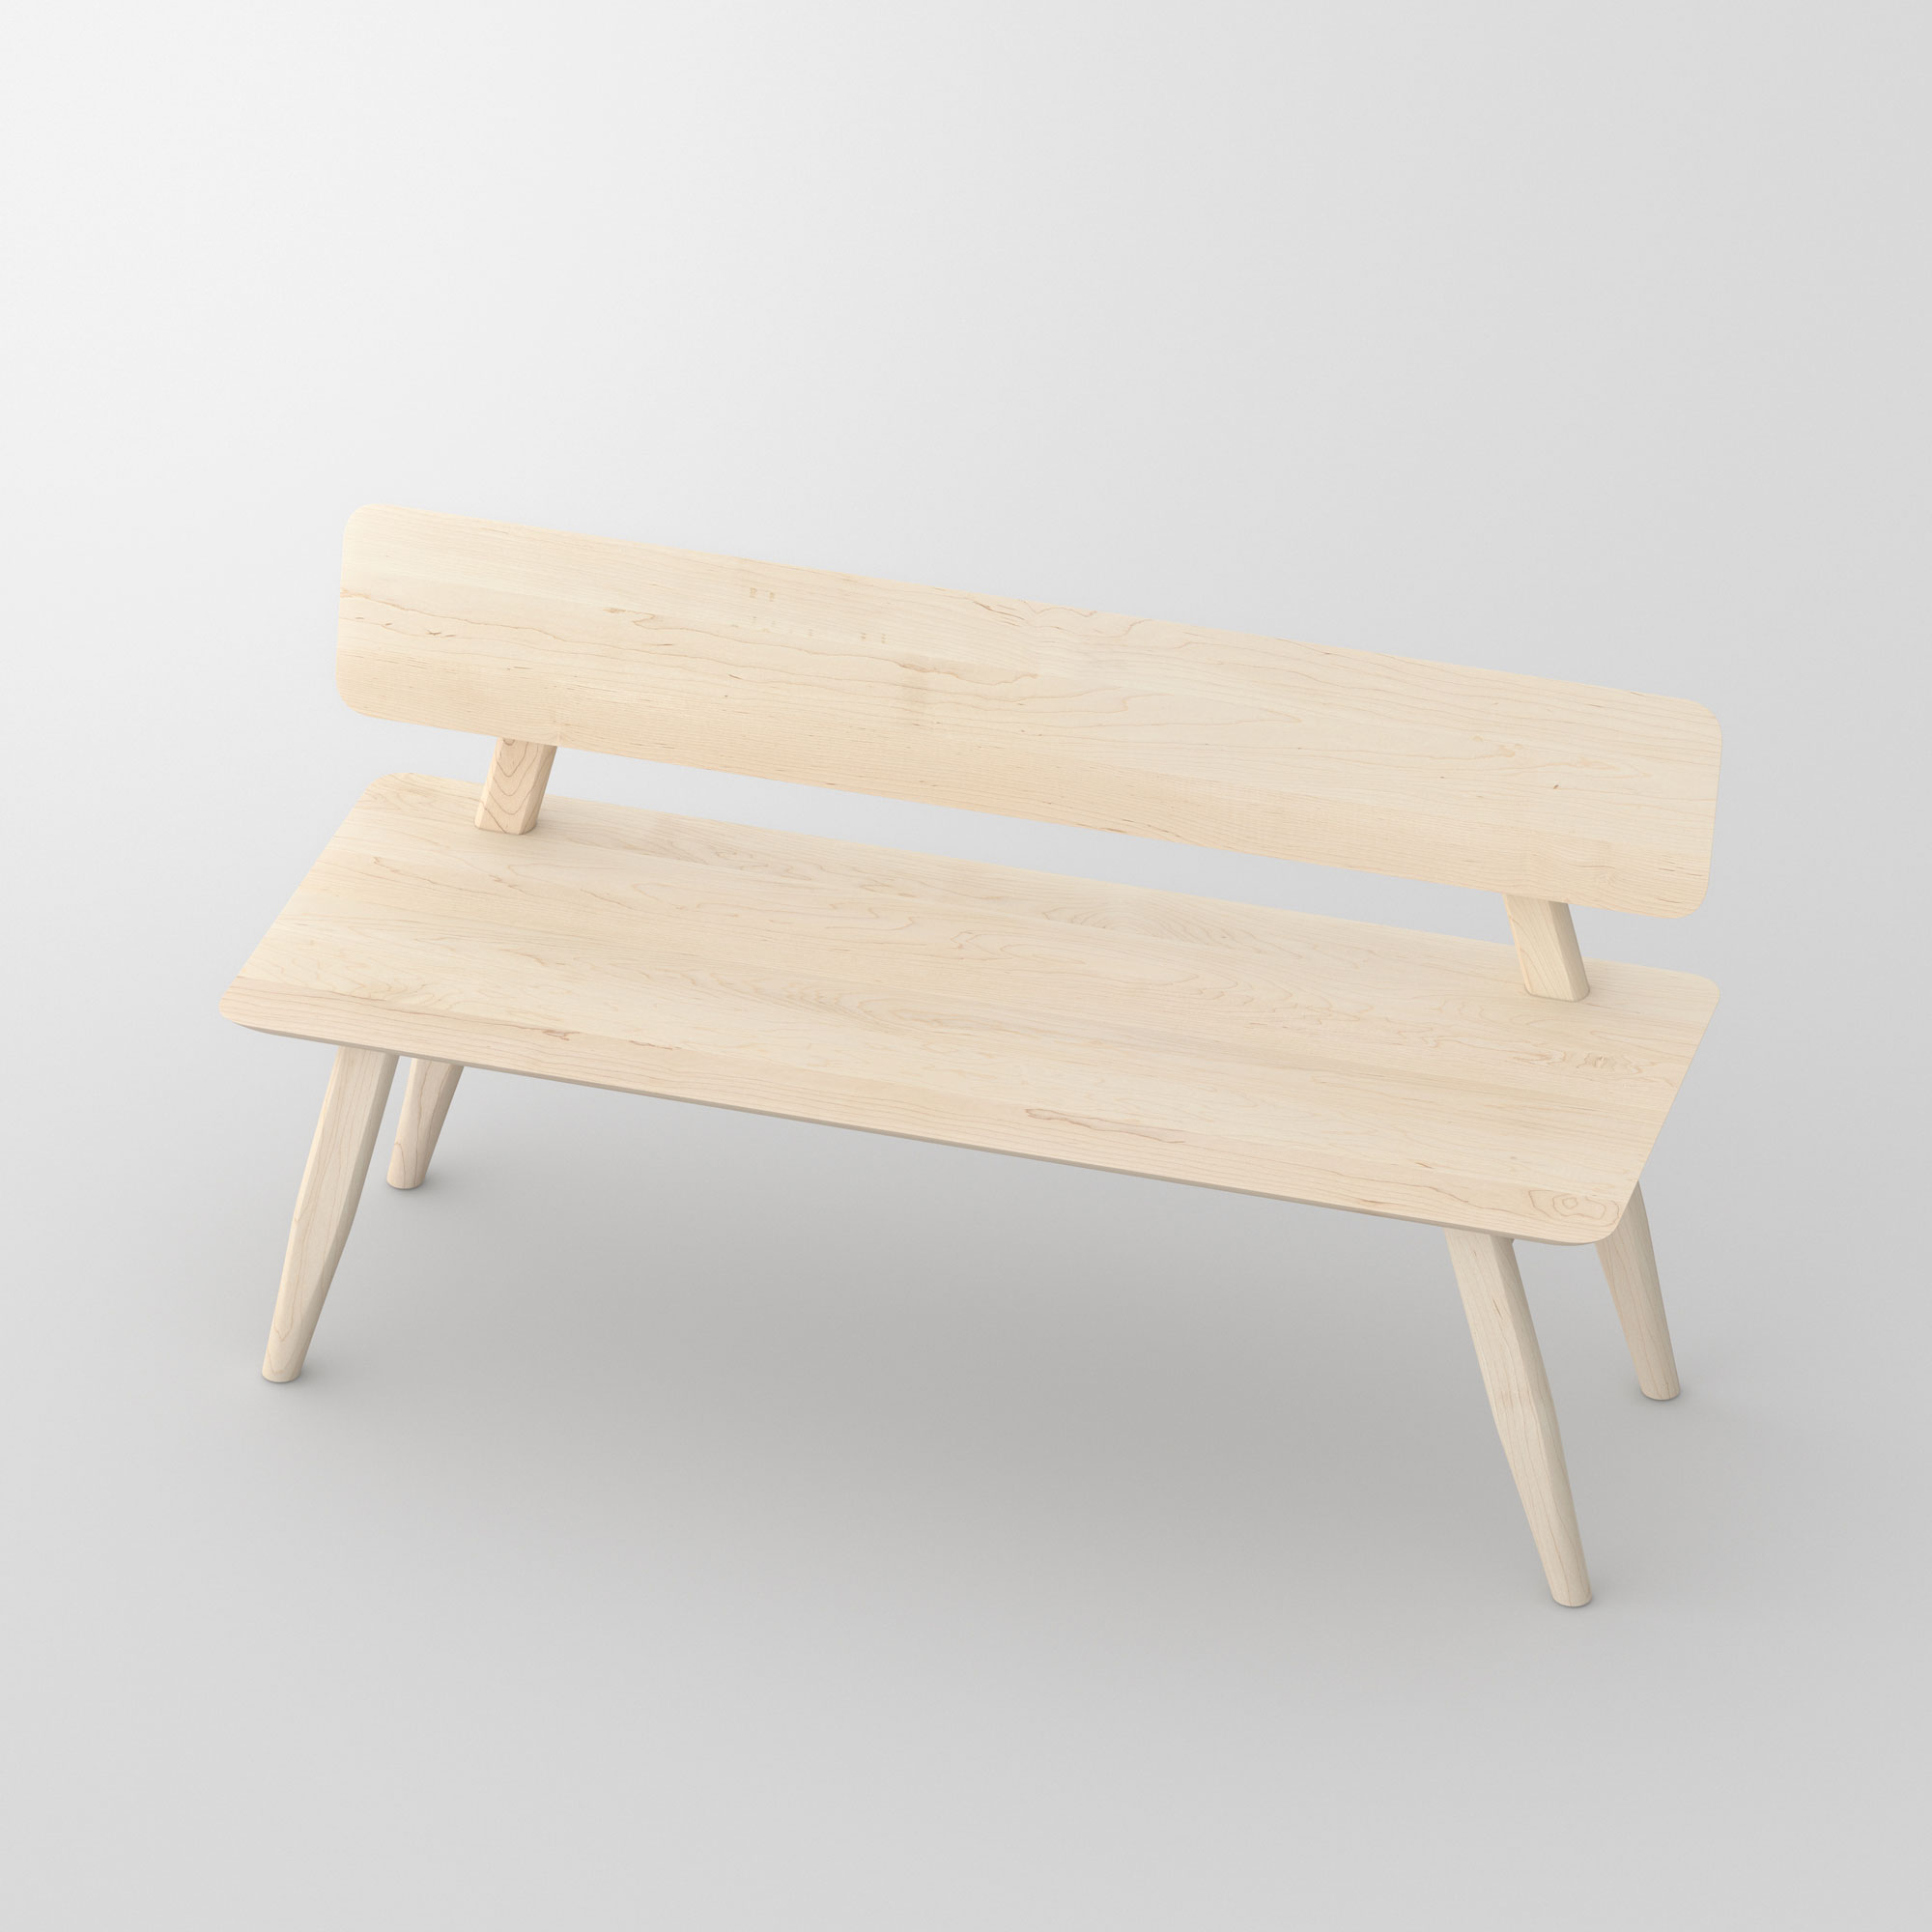 Bench with Back AETAS RL cam3 custom made in solid wood by vitamin design